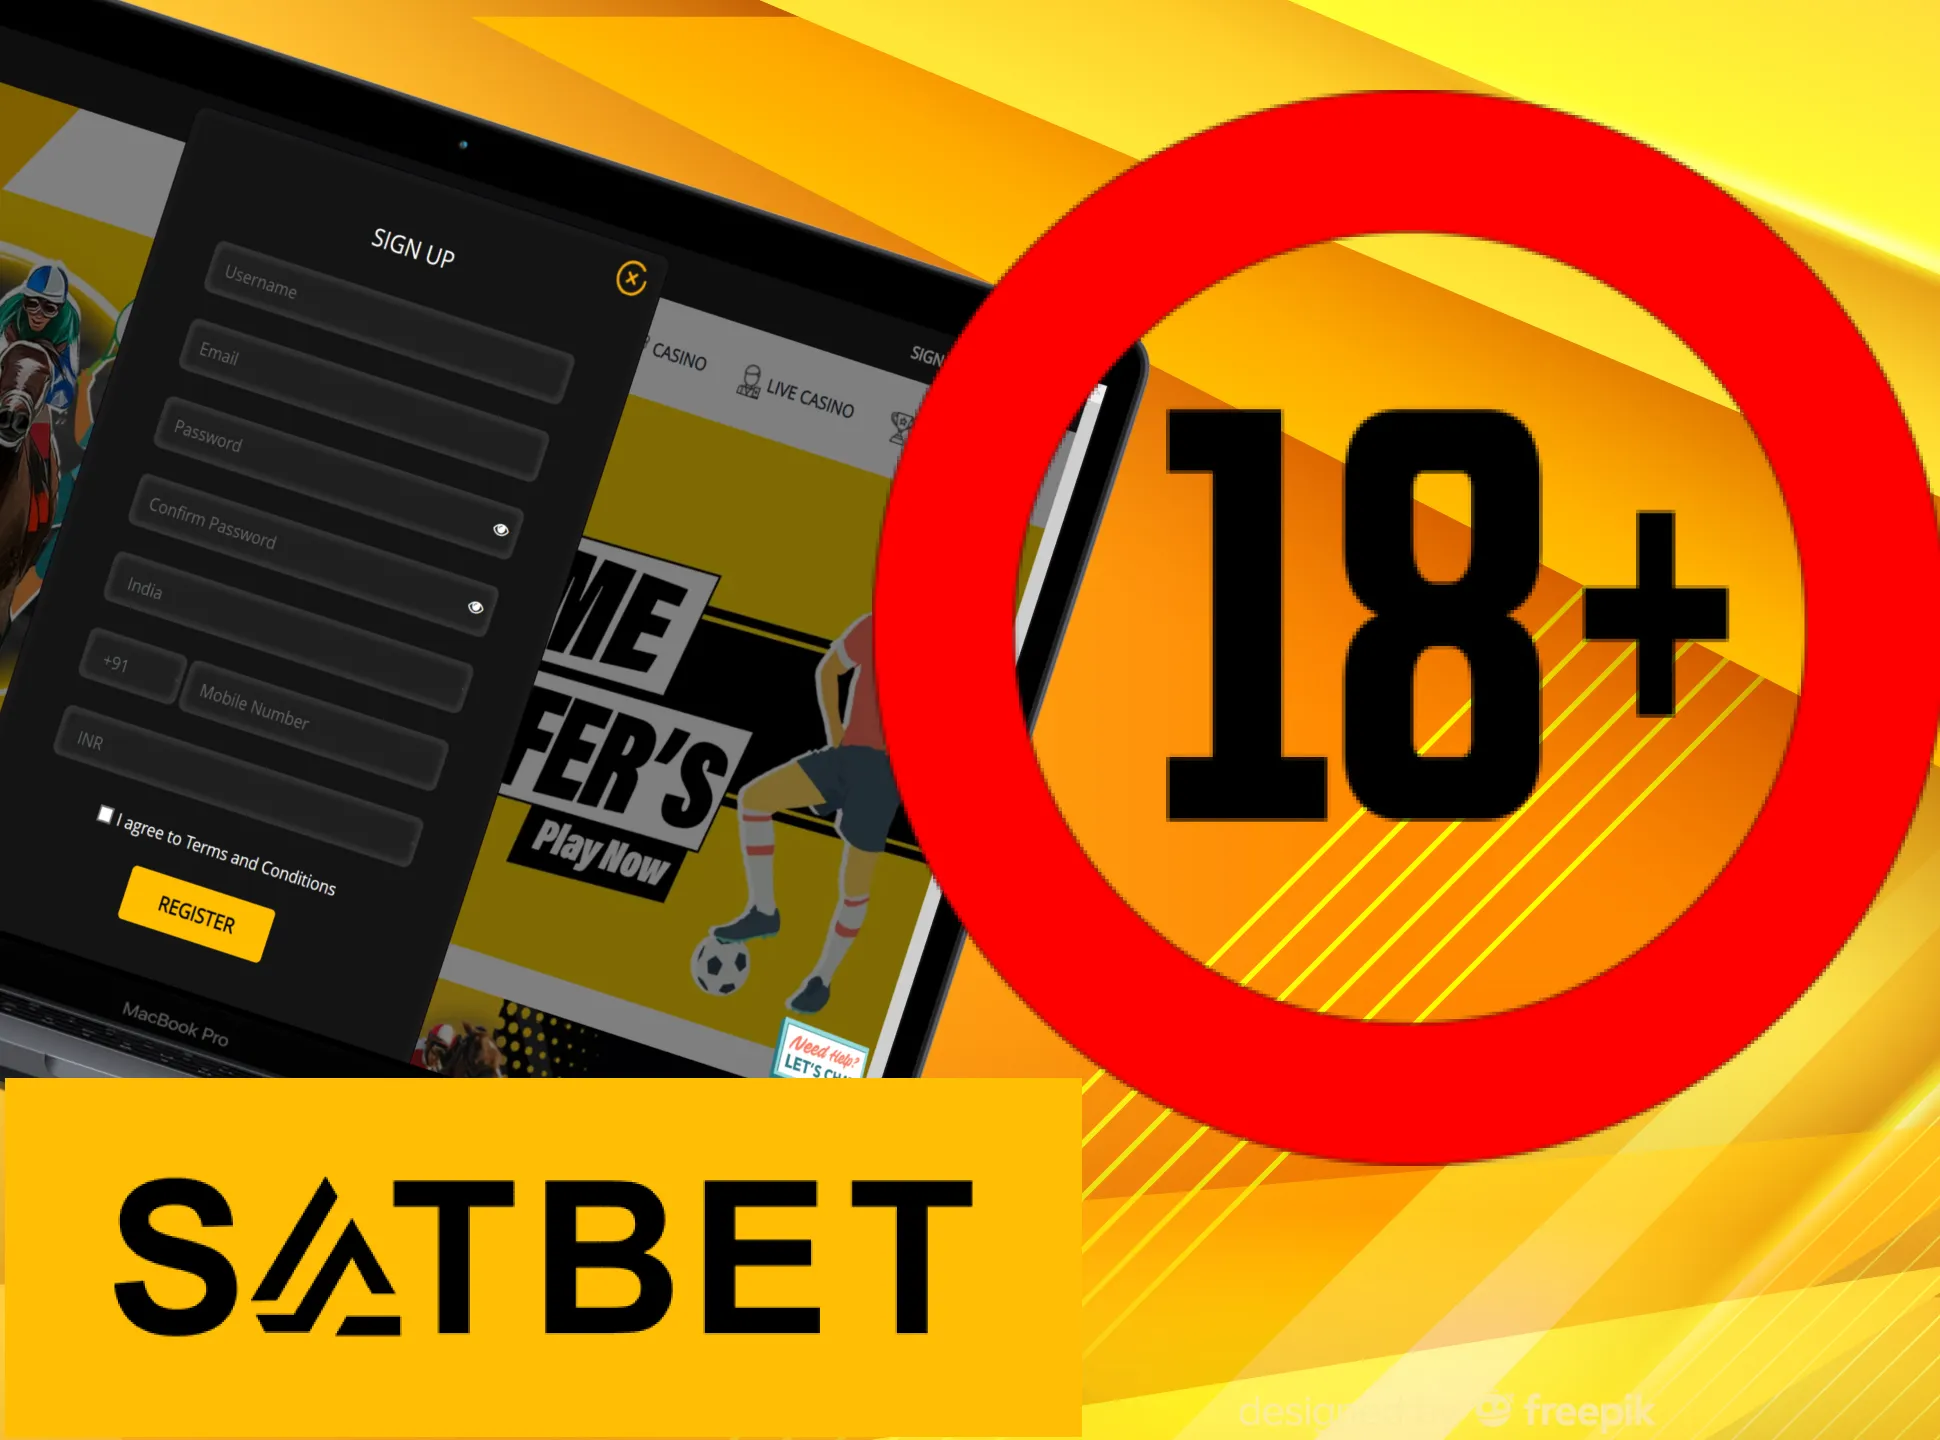 Read Satbet account registration requirements before starting registration.